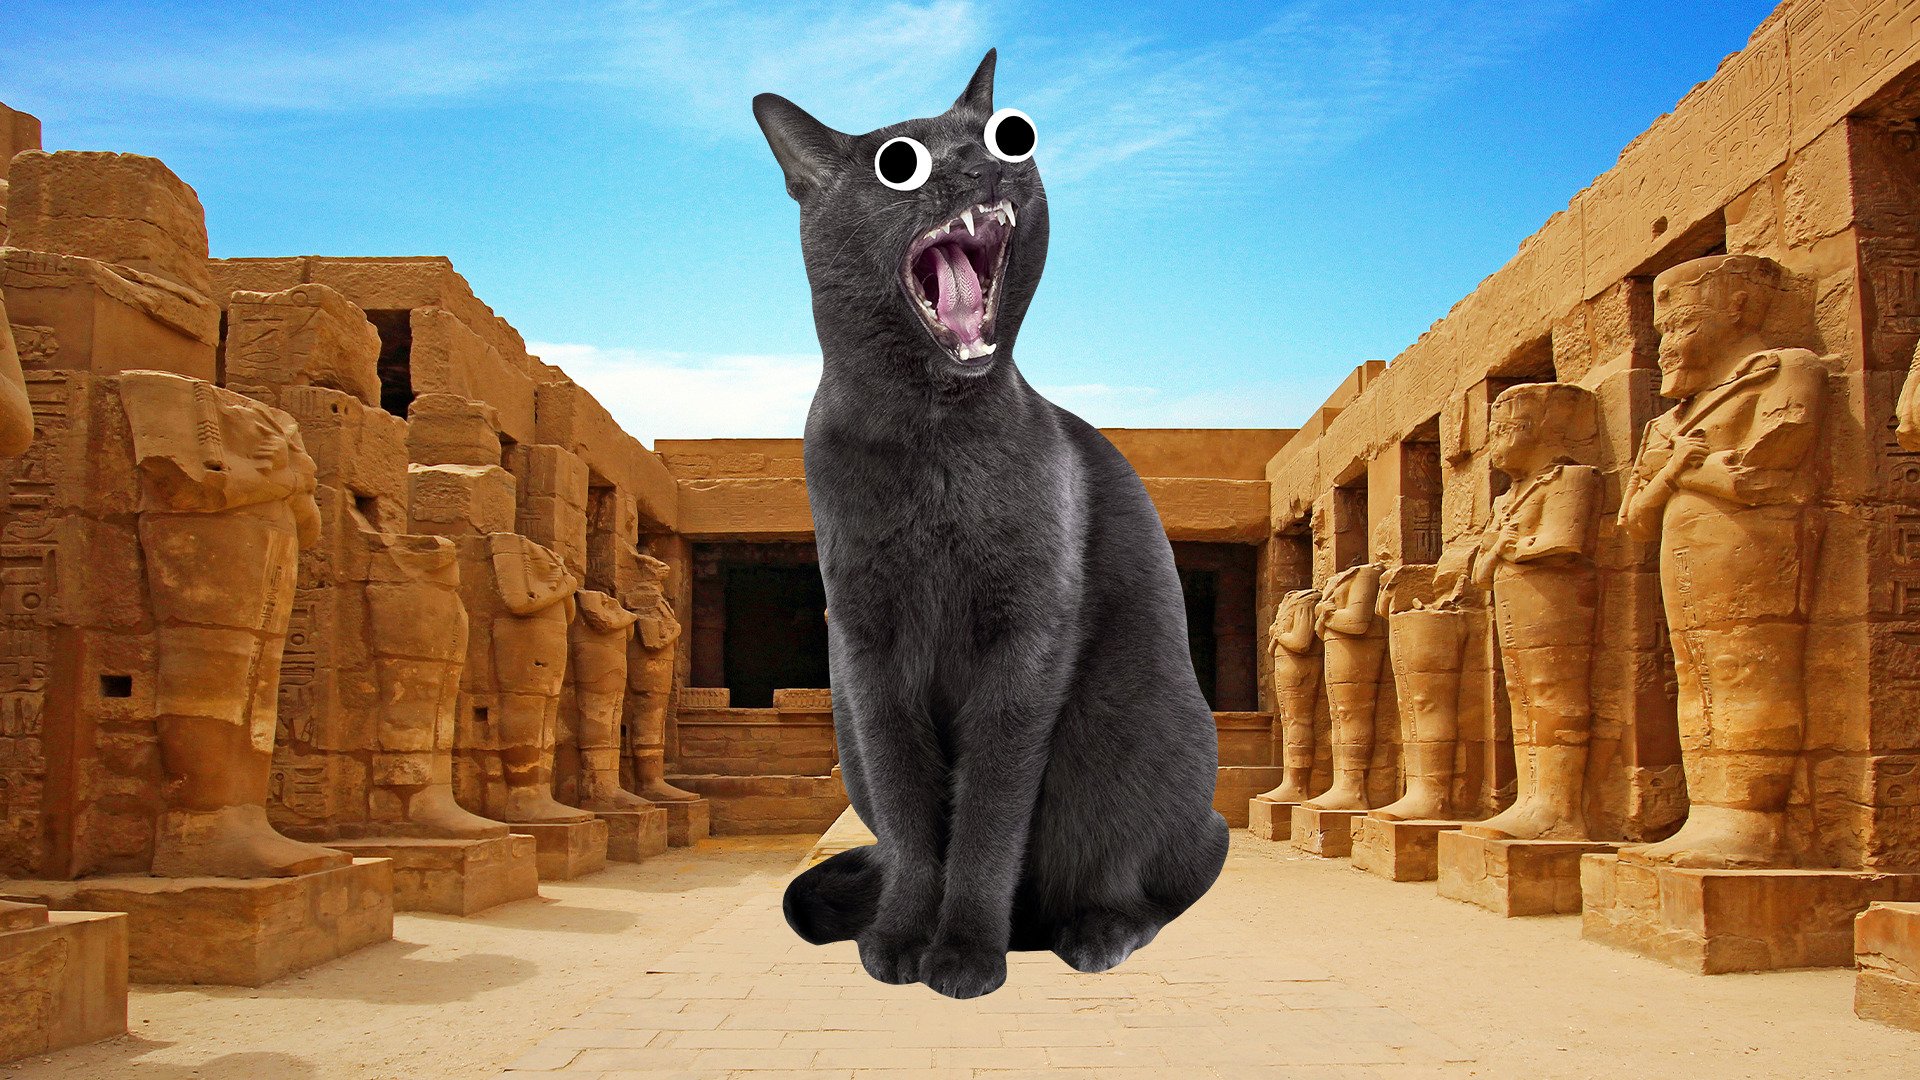 Screaming cat and ancient Egyptian ruins